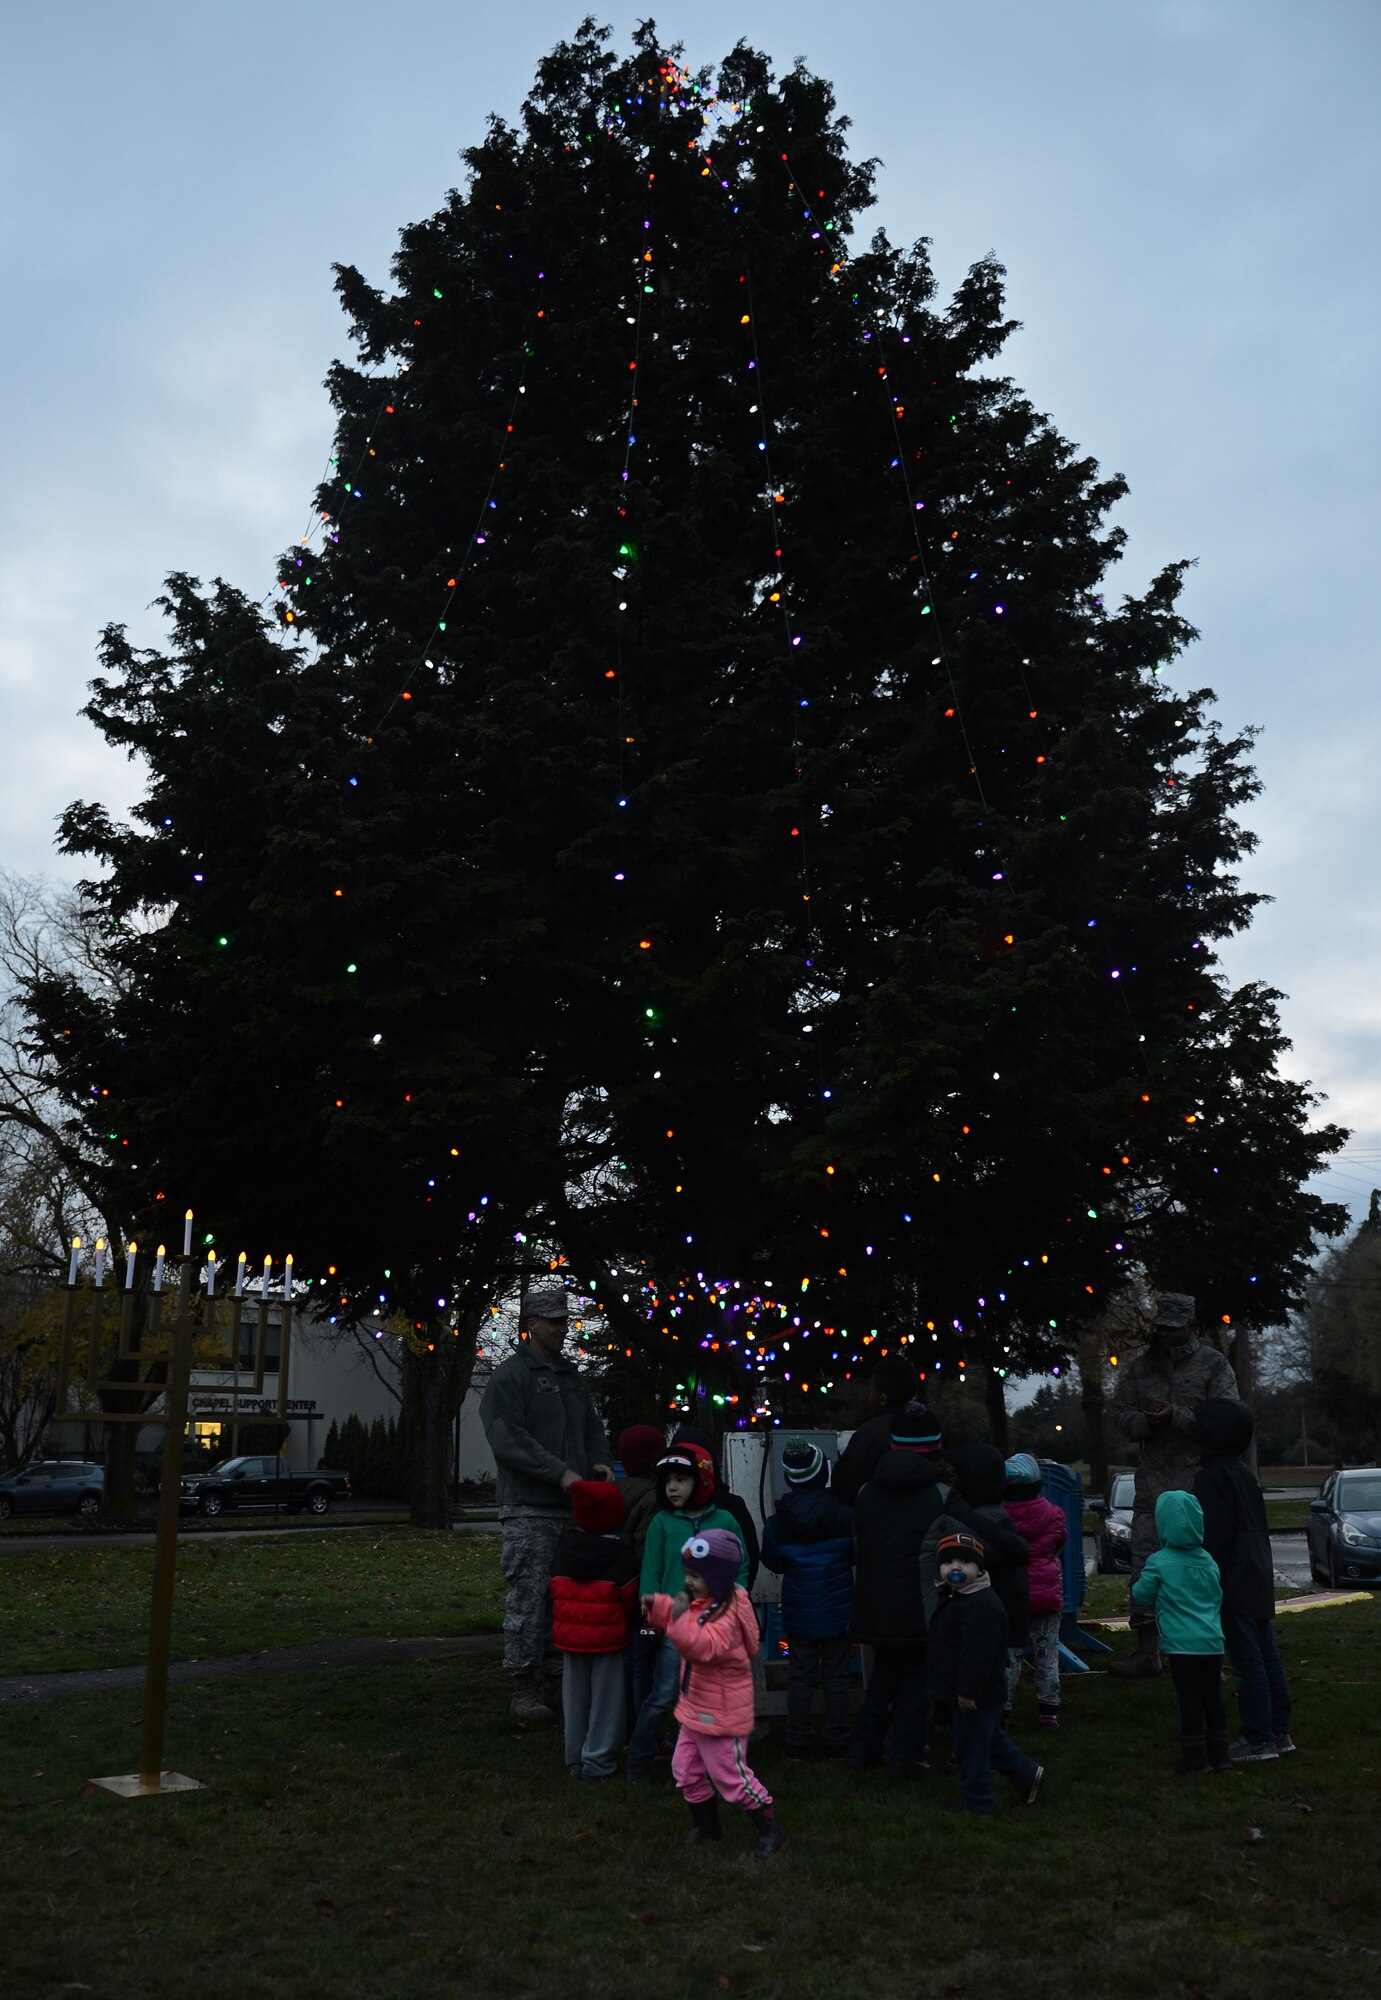 Team McChord families surround the holiday tree during the McChord Field Annual Tree Lighing Ceremony Dec. 5, 2016 at Joint Base Lewis-McChord, Wash. Santa Claus and his elves visited children, while families participated in several events following the ceremony. (U.S. Air Force photo/Senior Airman Divine Cox)